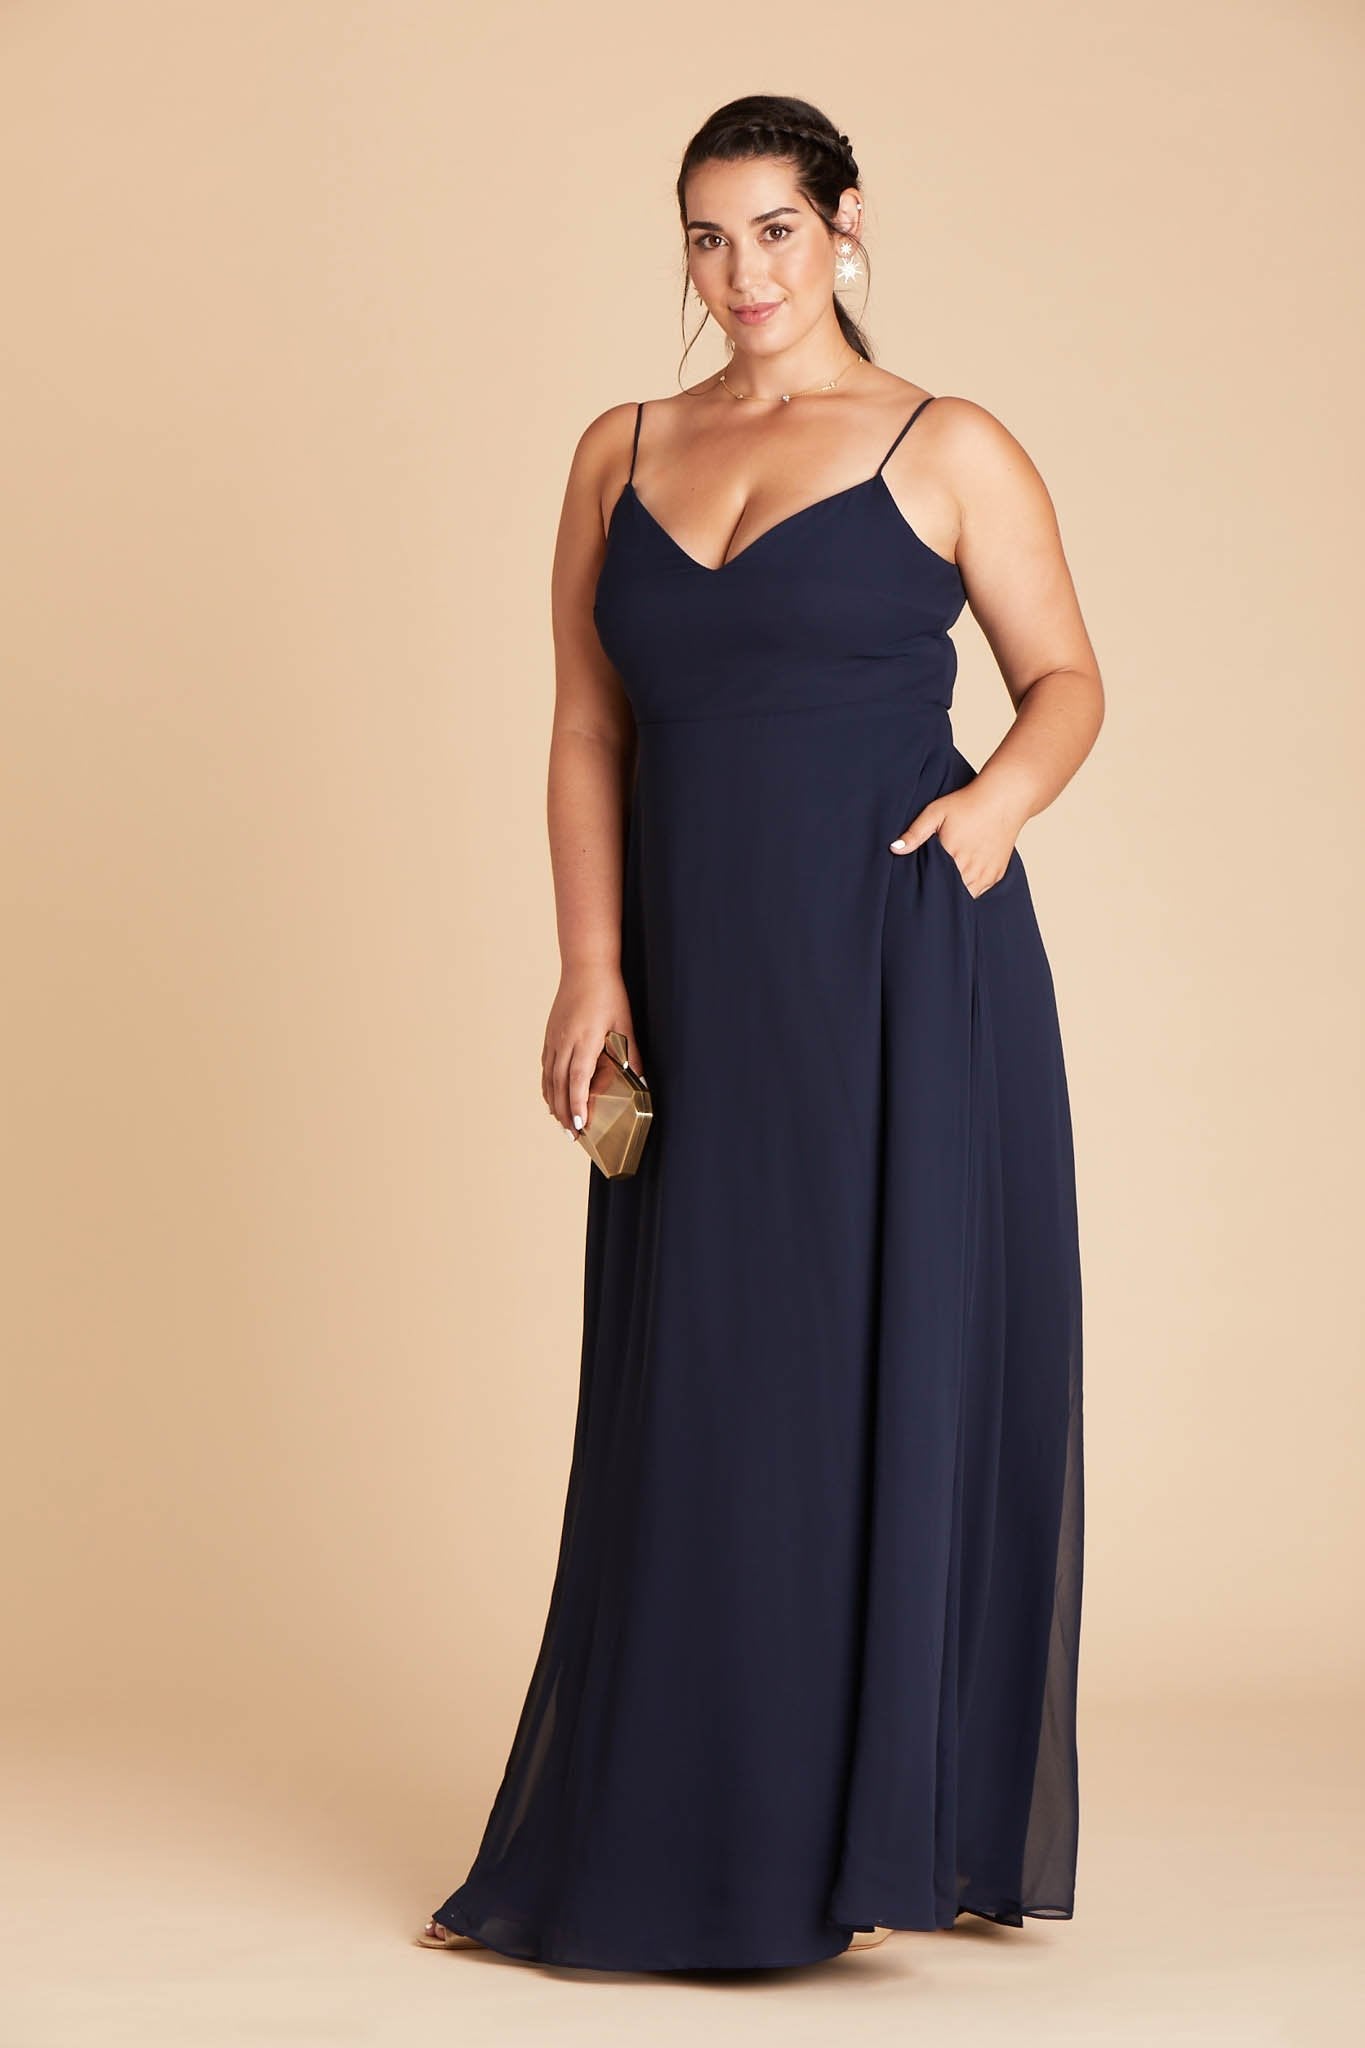 Devin convertible plus size bridesmaids dress in navy blue chiffon by Birdy Grey, front view with hand in pocket